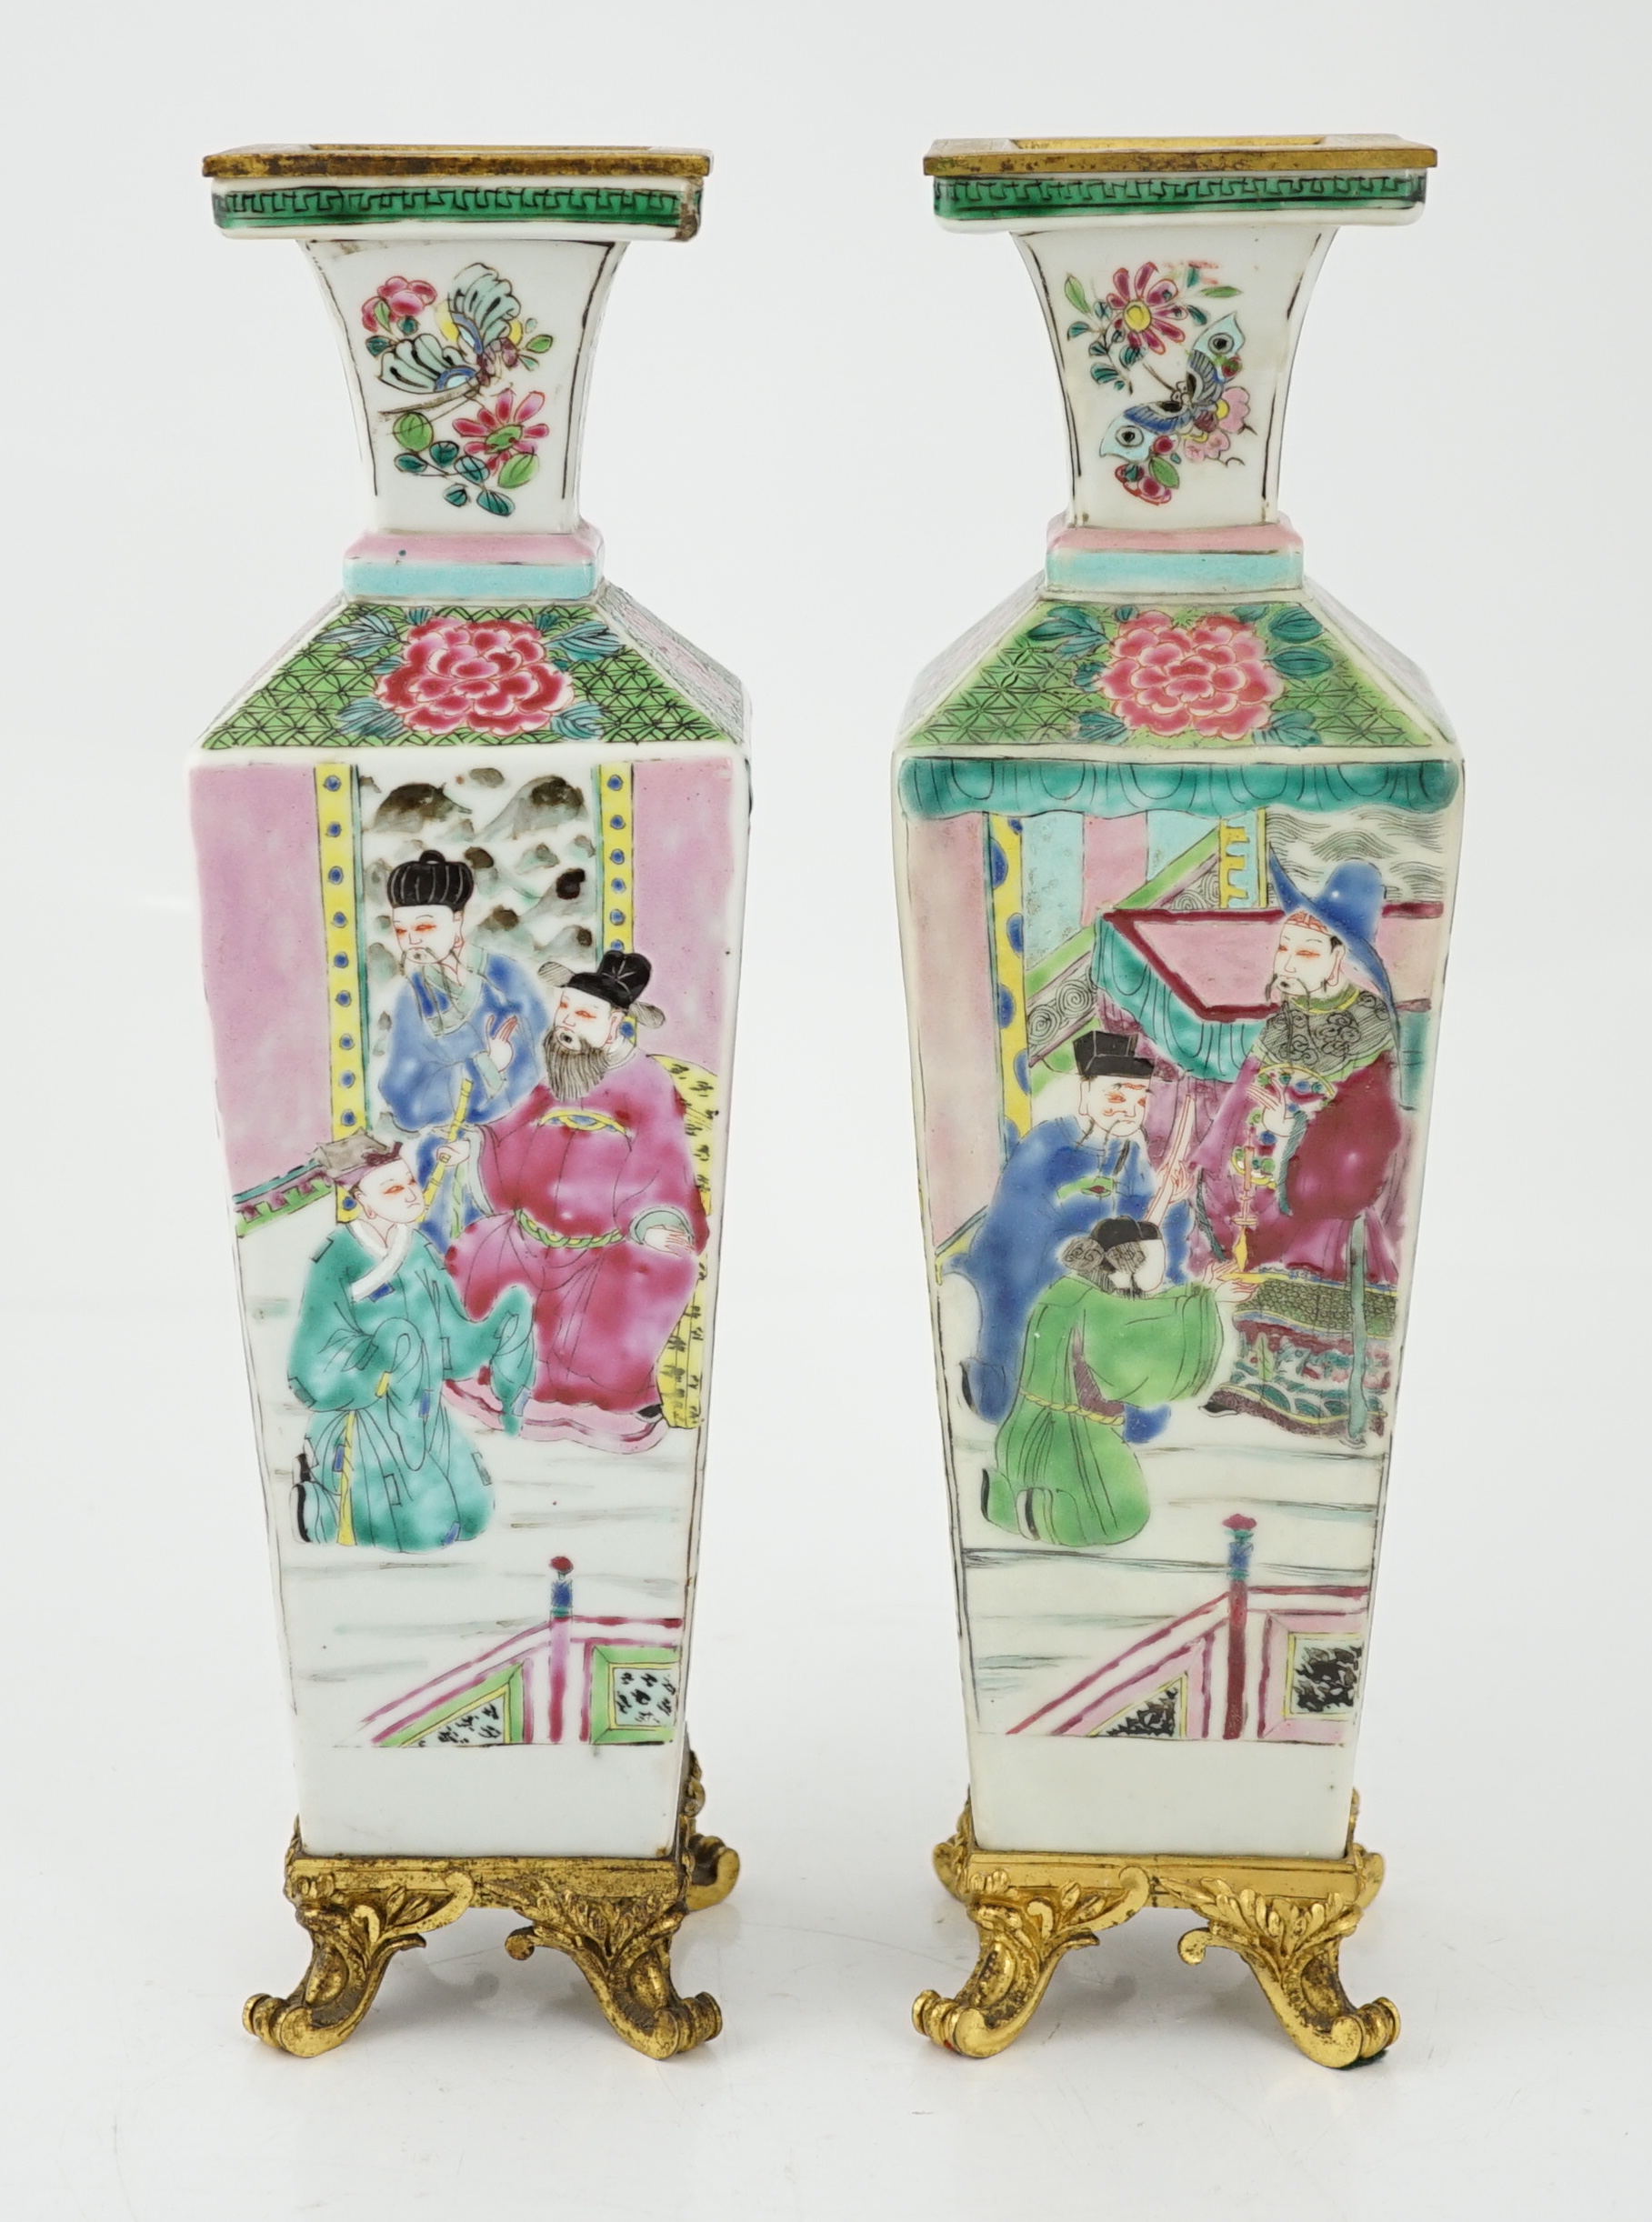 A pair of Chinese famille rose square baluster vases, late 19th/early 20th century, with European gilt metal mounts, each painted with figure scenes, total height 32cm